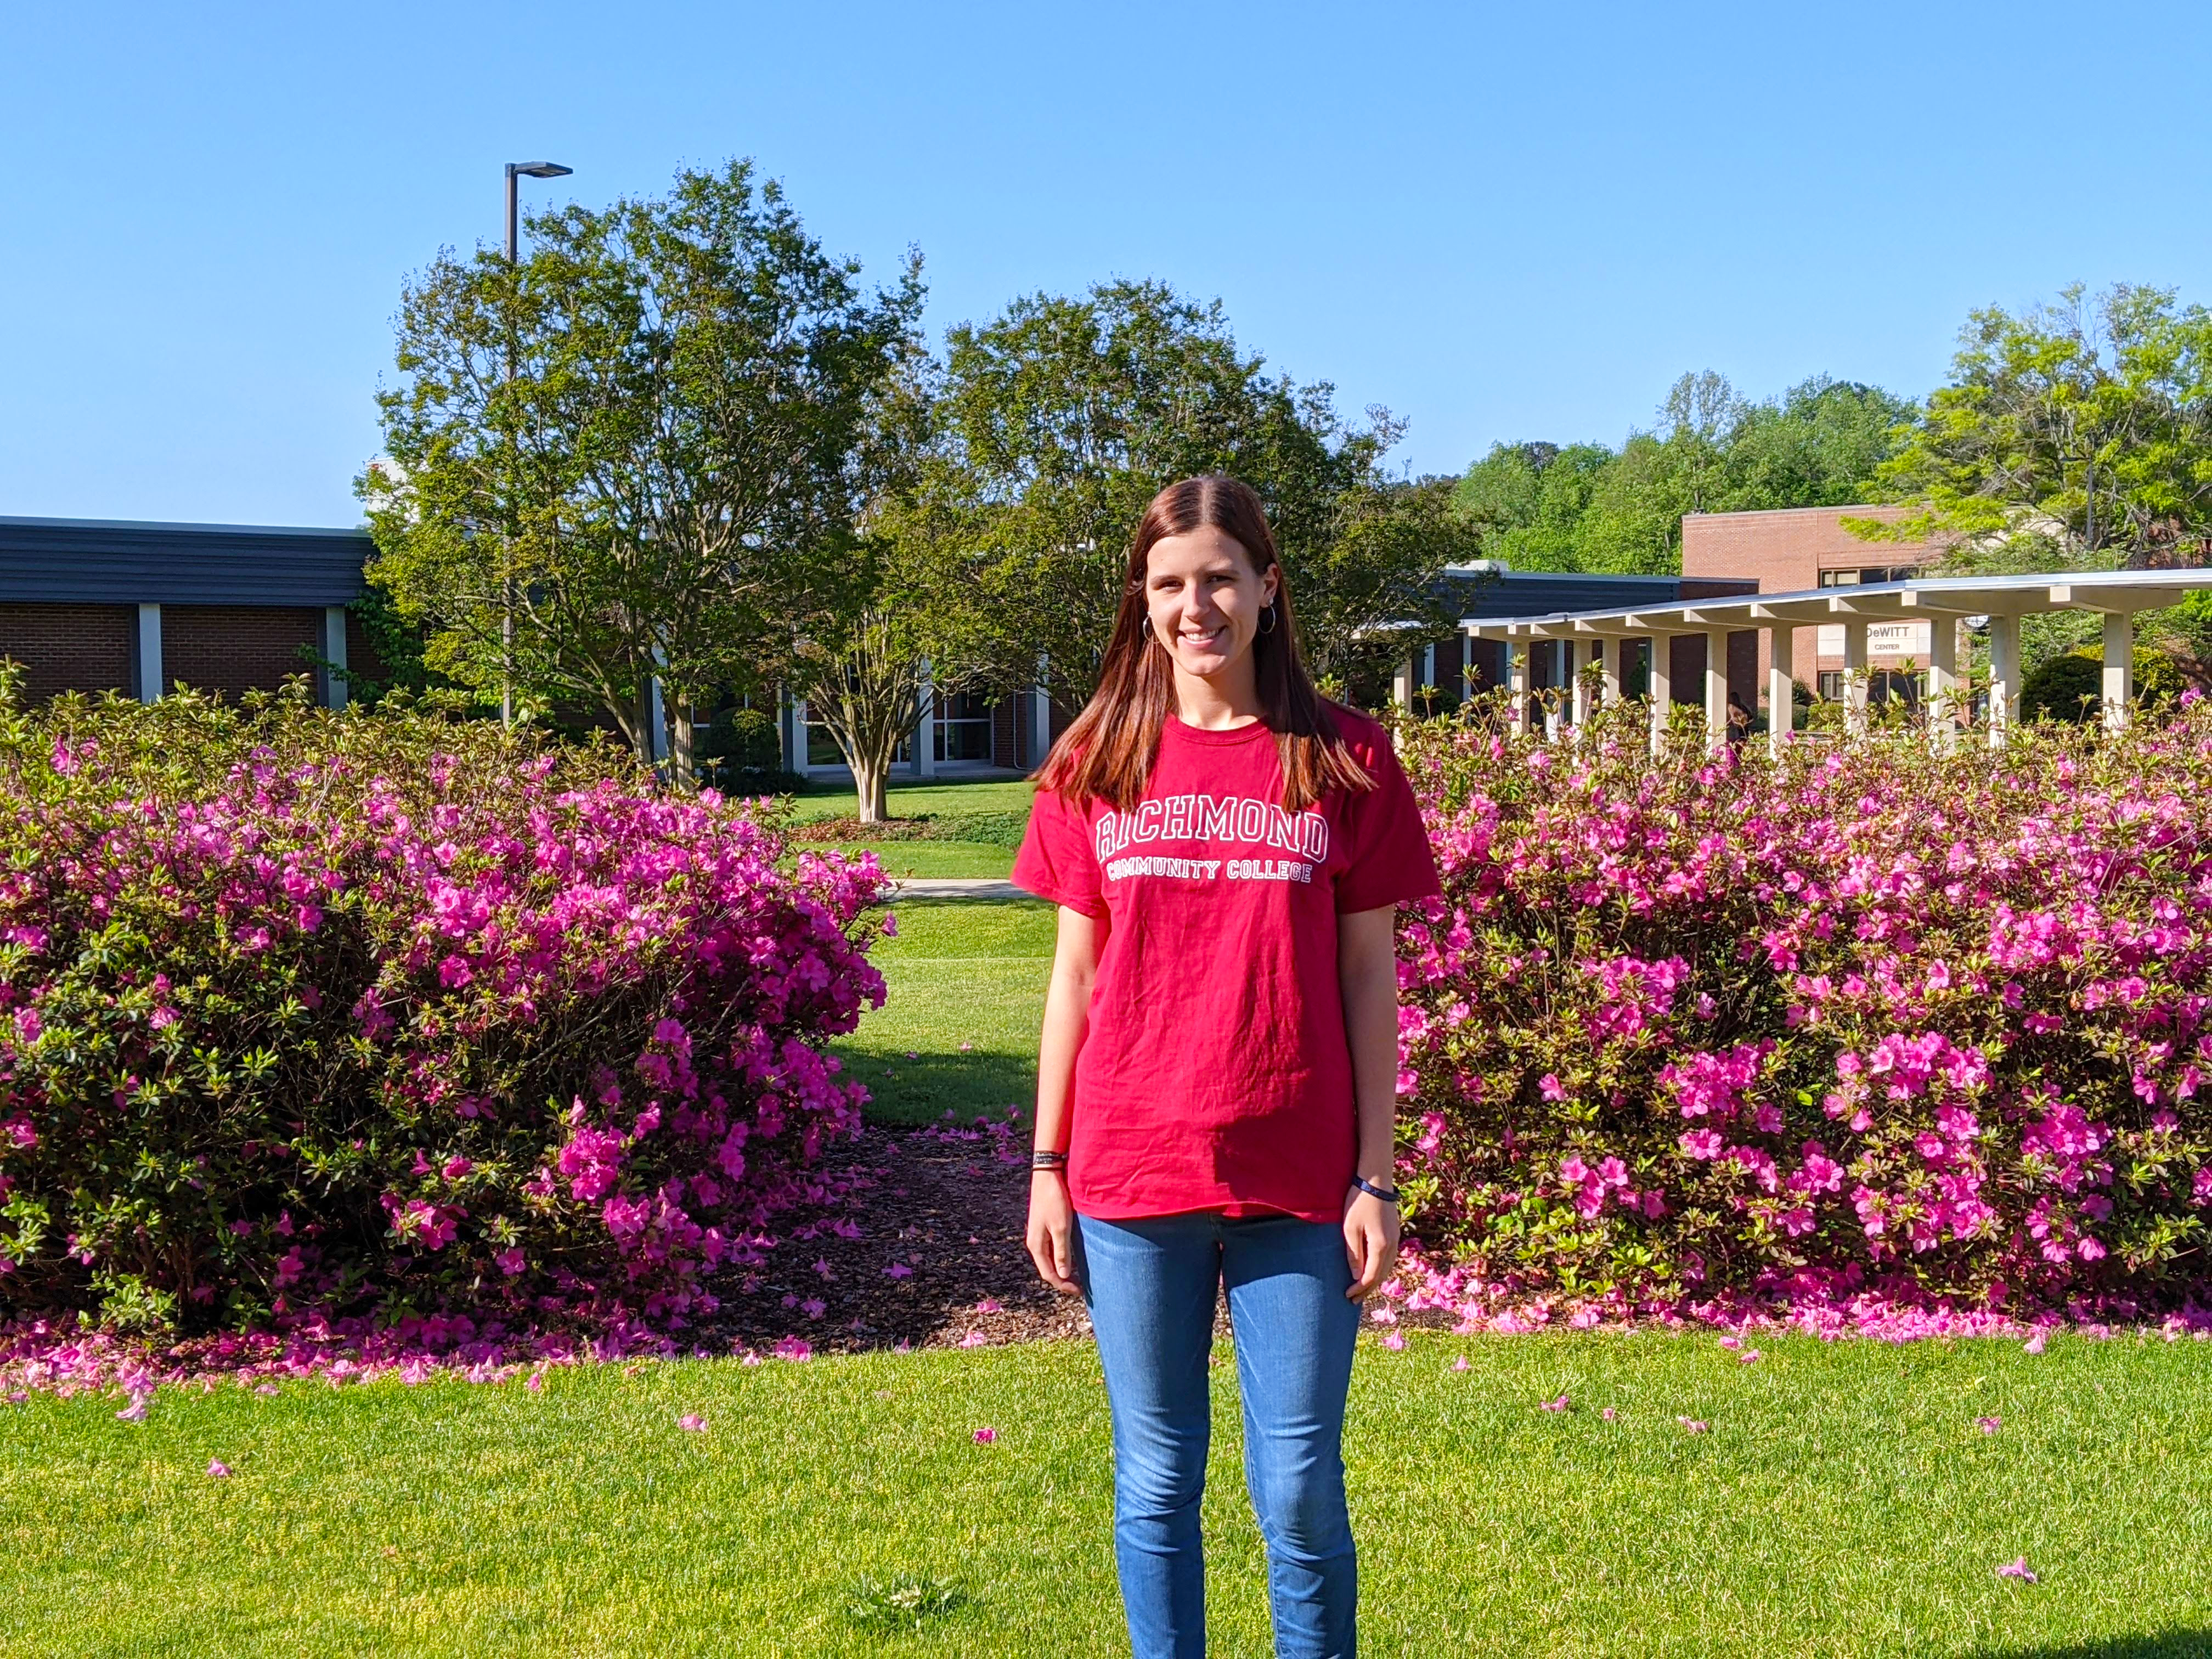 Bridget Norton poses for a picture on the Hamlet Campus